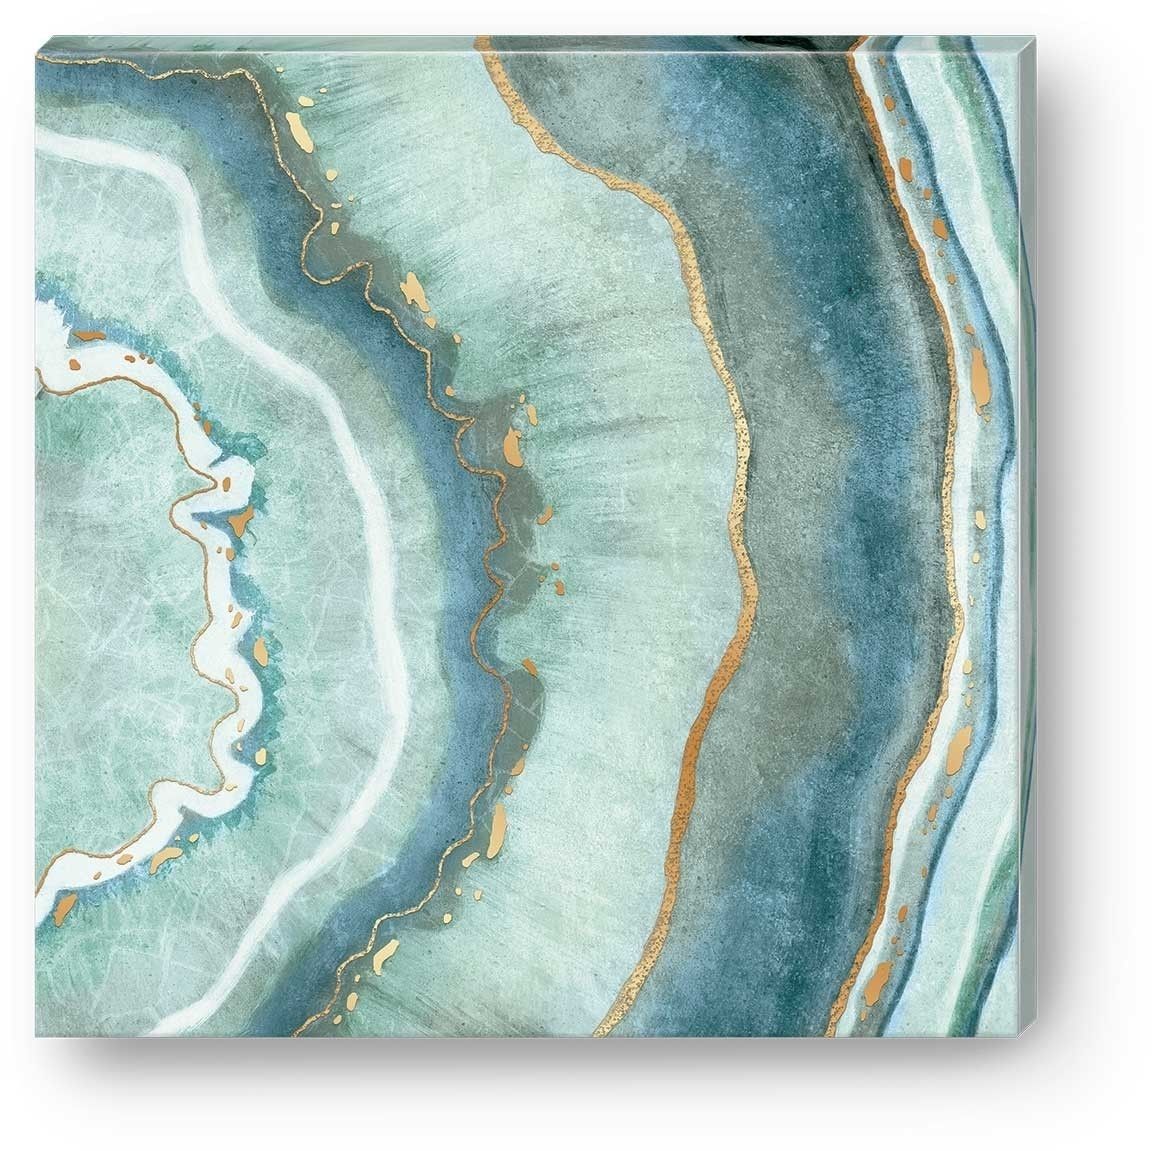 Modest Design Agate Wall Art Majestic Turquoise Agate | Design Ideas Within Most Recent Agate Wall Art (View 1 of 20)